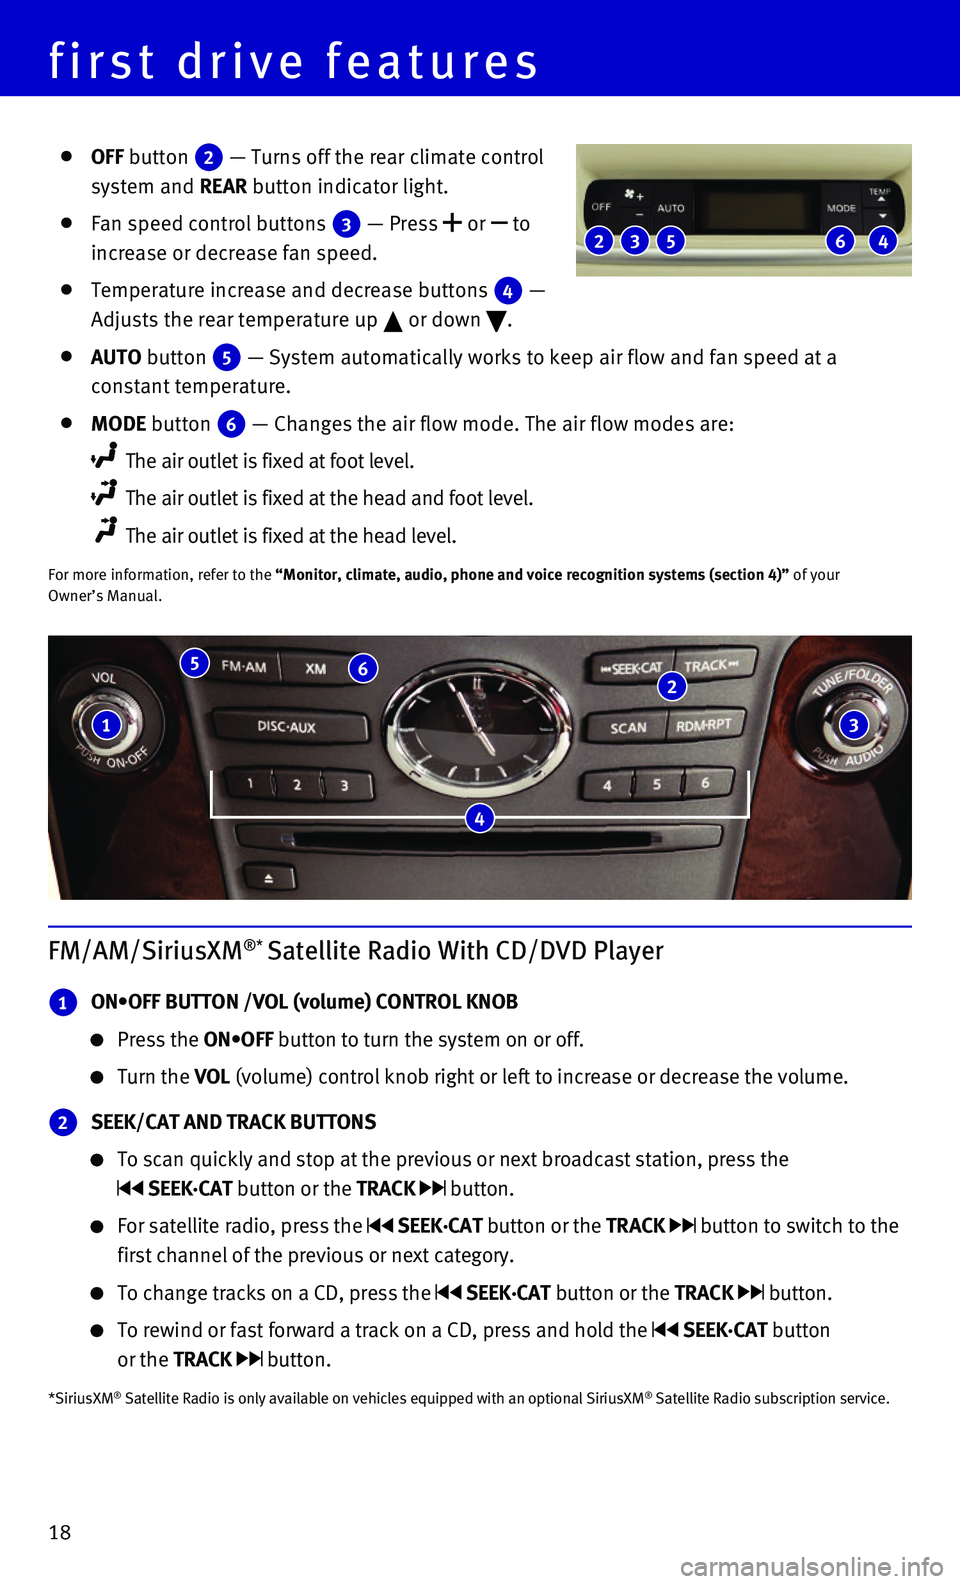 INFINITI QX80 2015  Quick Reference Guide 18
first drive features
FM/AM/SiriusXM®* Satellite Radio With CD/DVD Player
 1 ON•OFF BUTTON /VOL (volume) CONTROL KNOB 
     Press  the ON•OFF button to turn the system on or off. 
     Turn  th